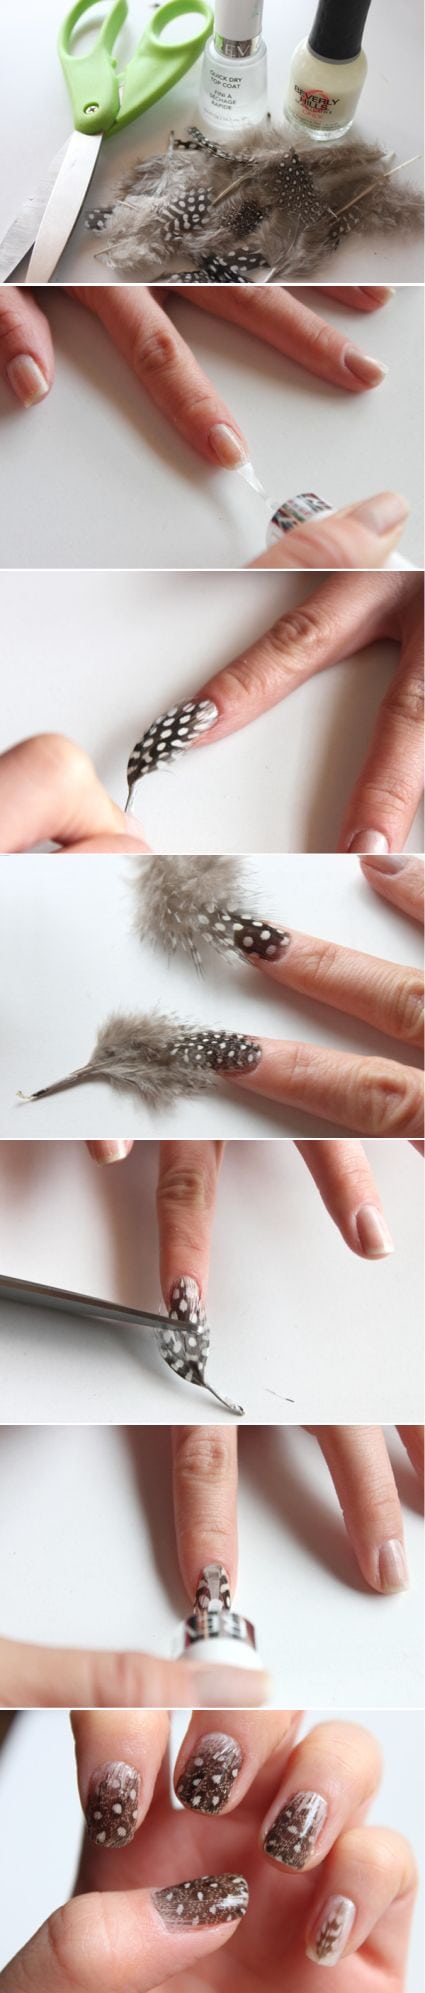 [ad_1]

Feather Nails tutorial, for low-maintenance nails. Not really my thing, but interesting none the less.
Source by zillah1985
[ad_2]
			
			…